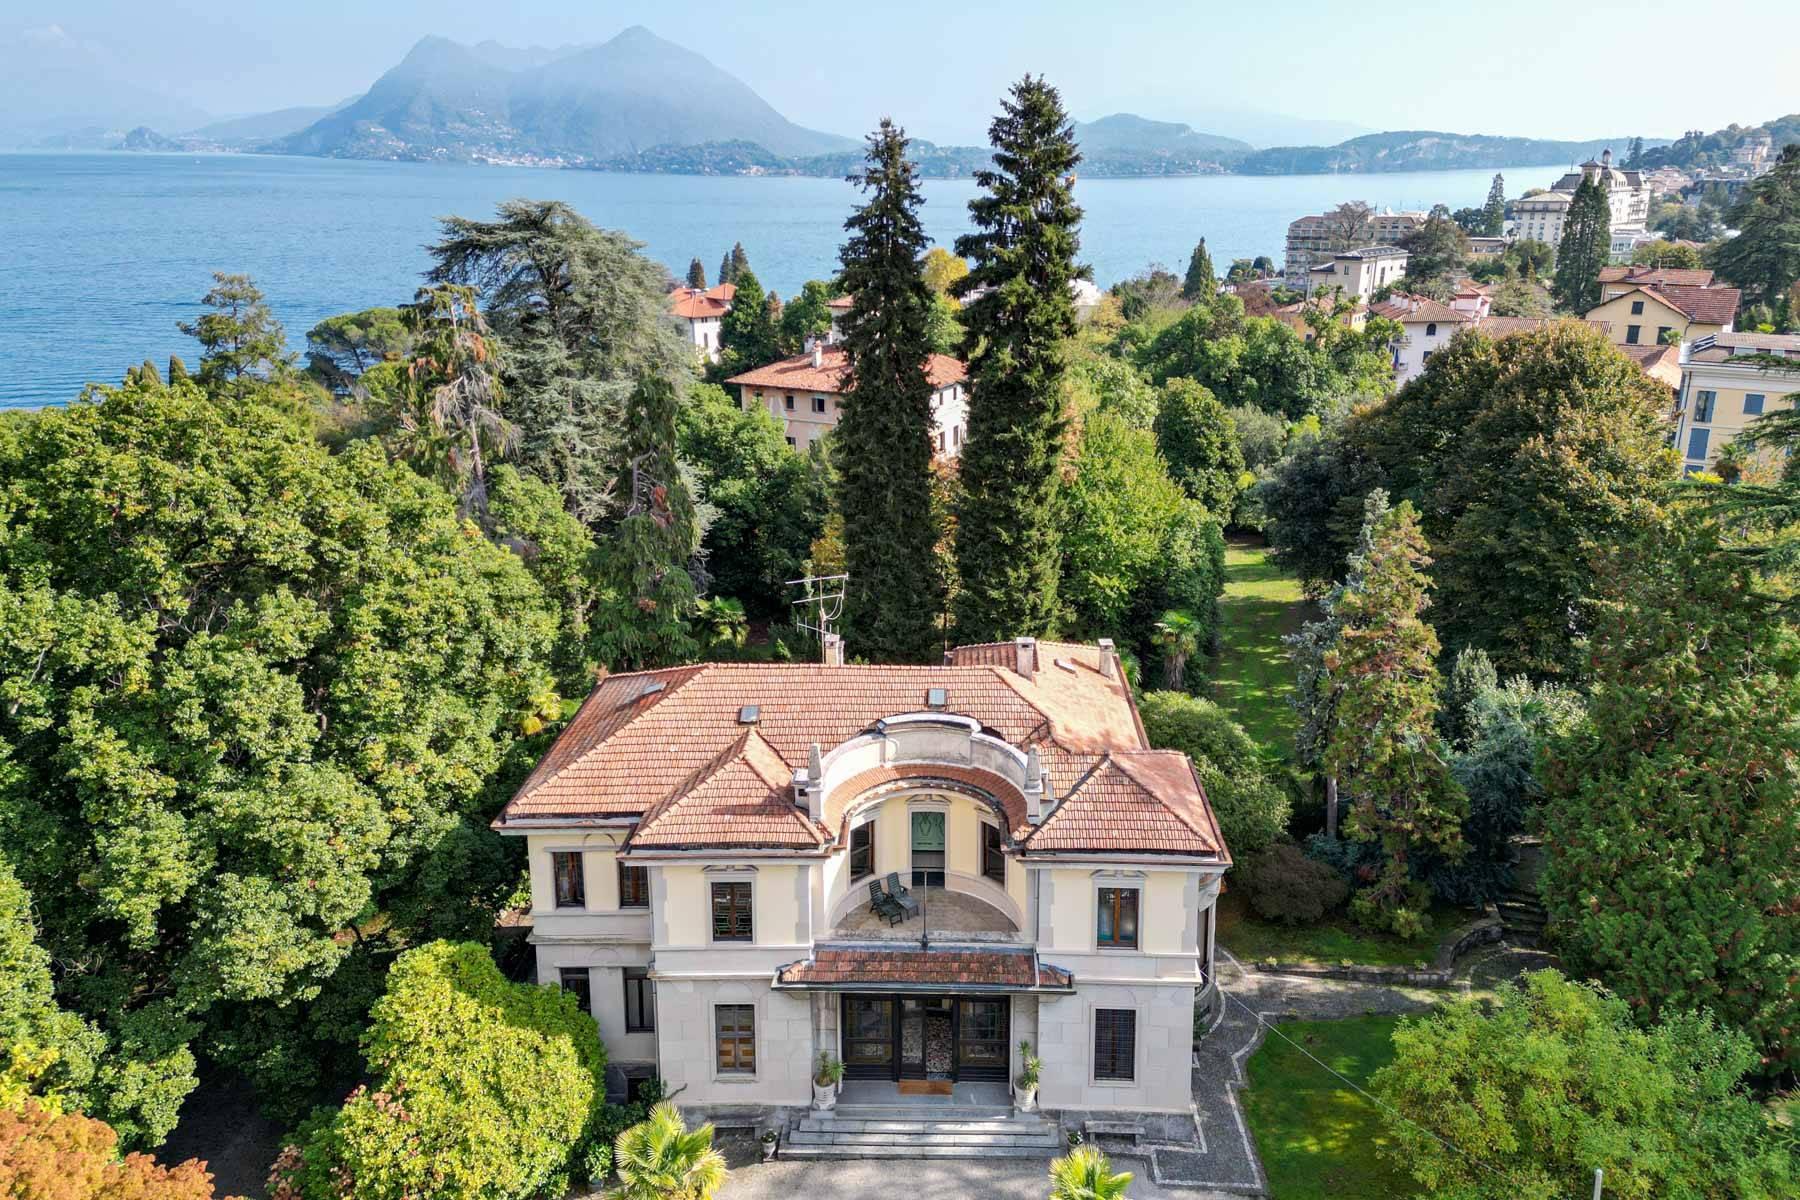 Enchanting Art Nouveau villa immersed in a splendid centuries-old park in the heart of Stresa - 2